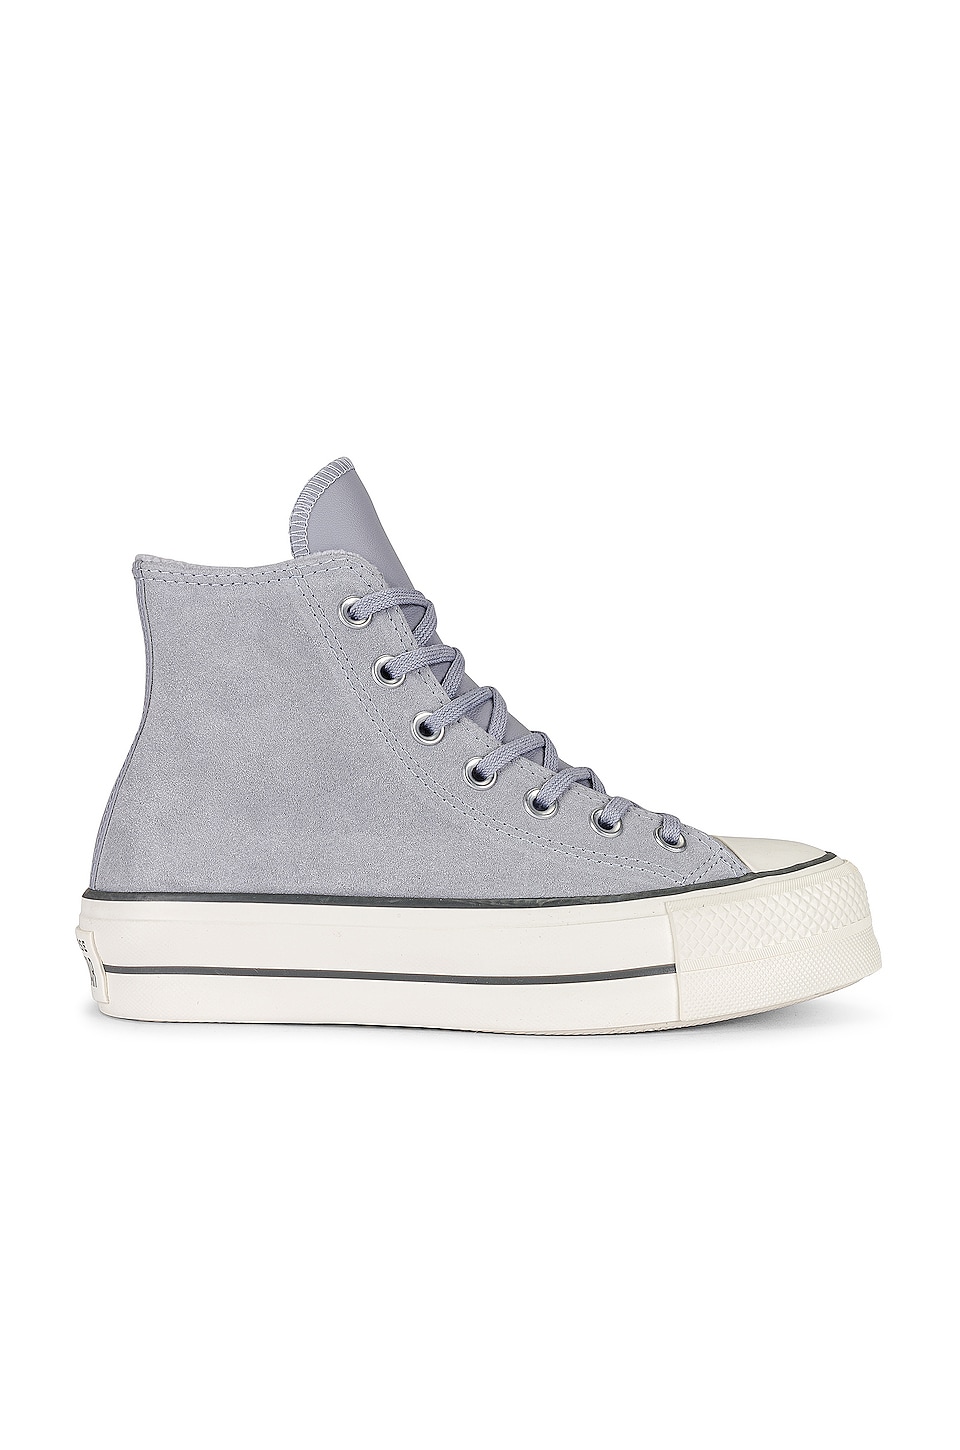 Converse Chuck Taylor All Star Lift Cozy Utility Sneaker in Gravel ...